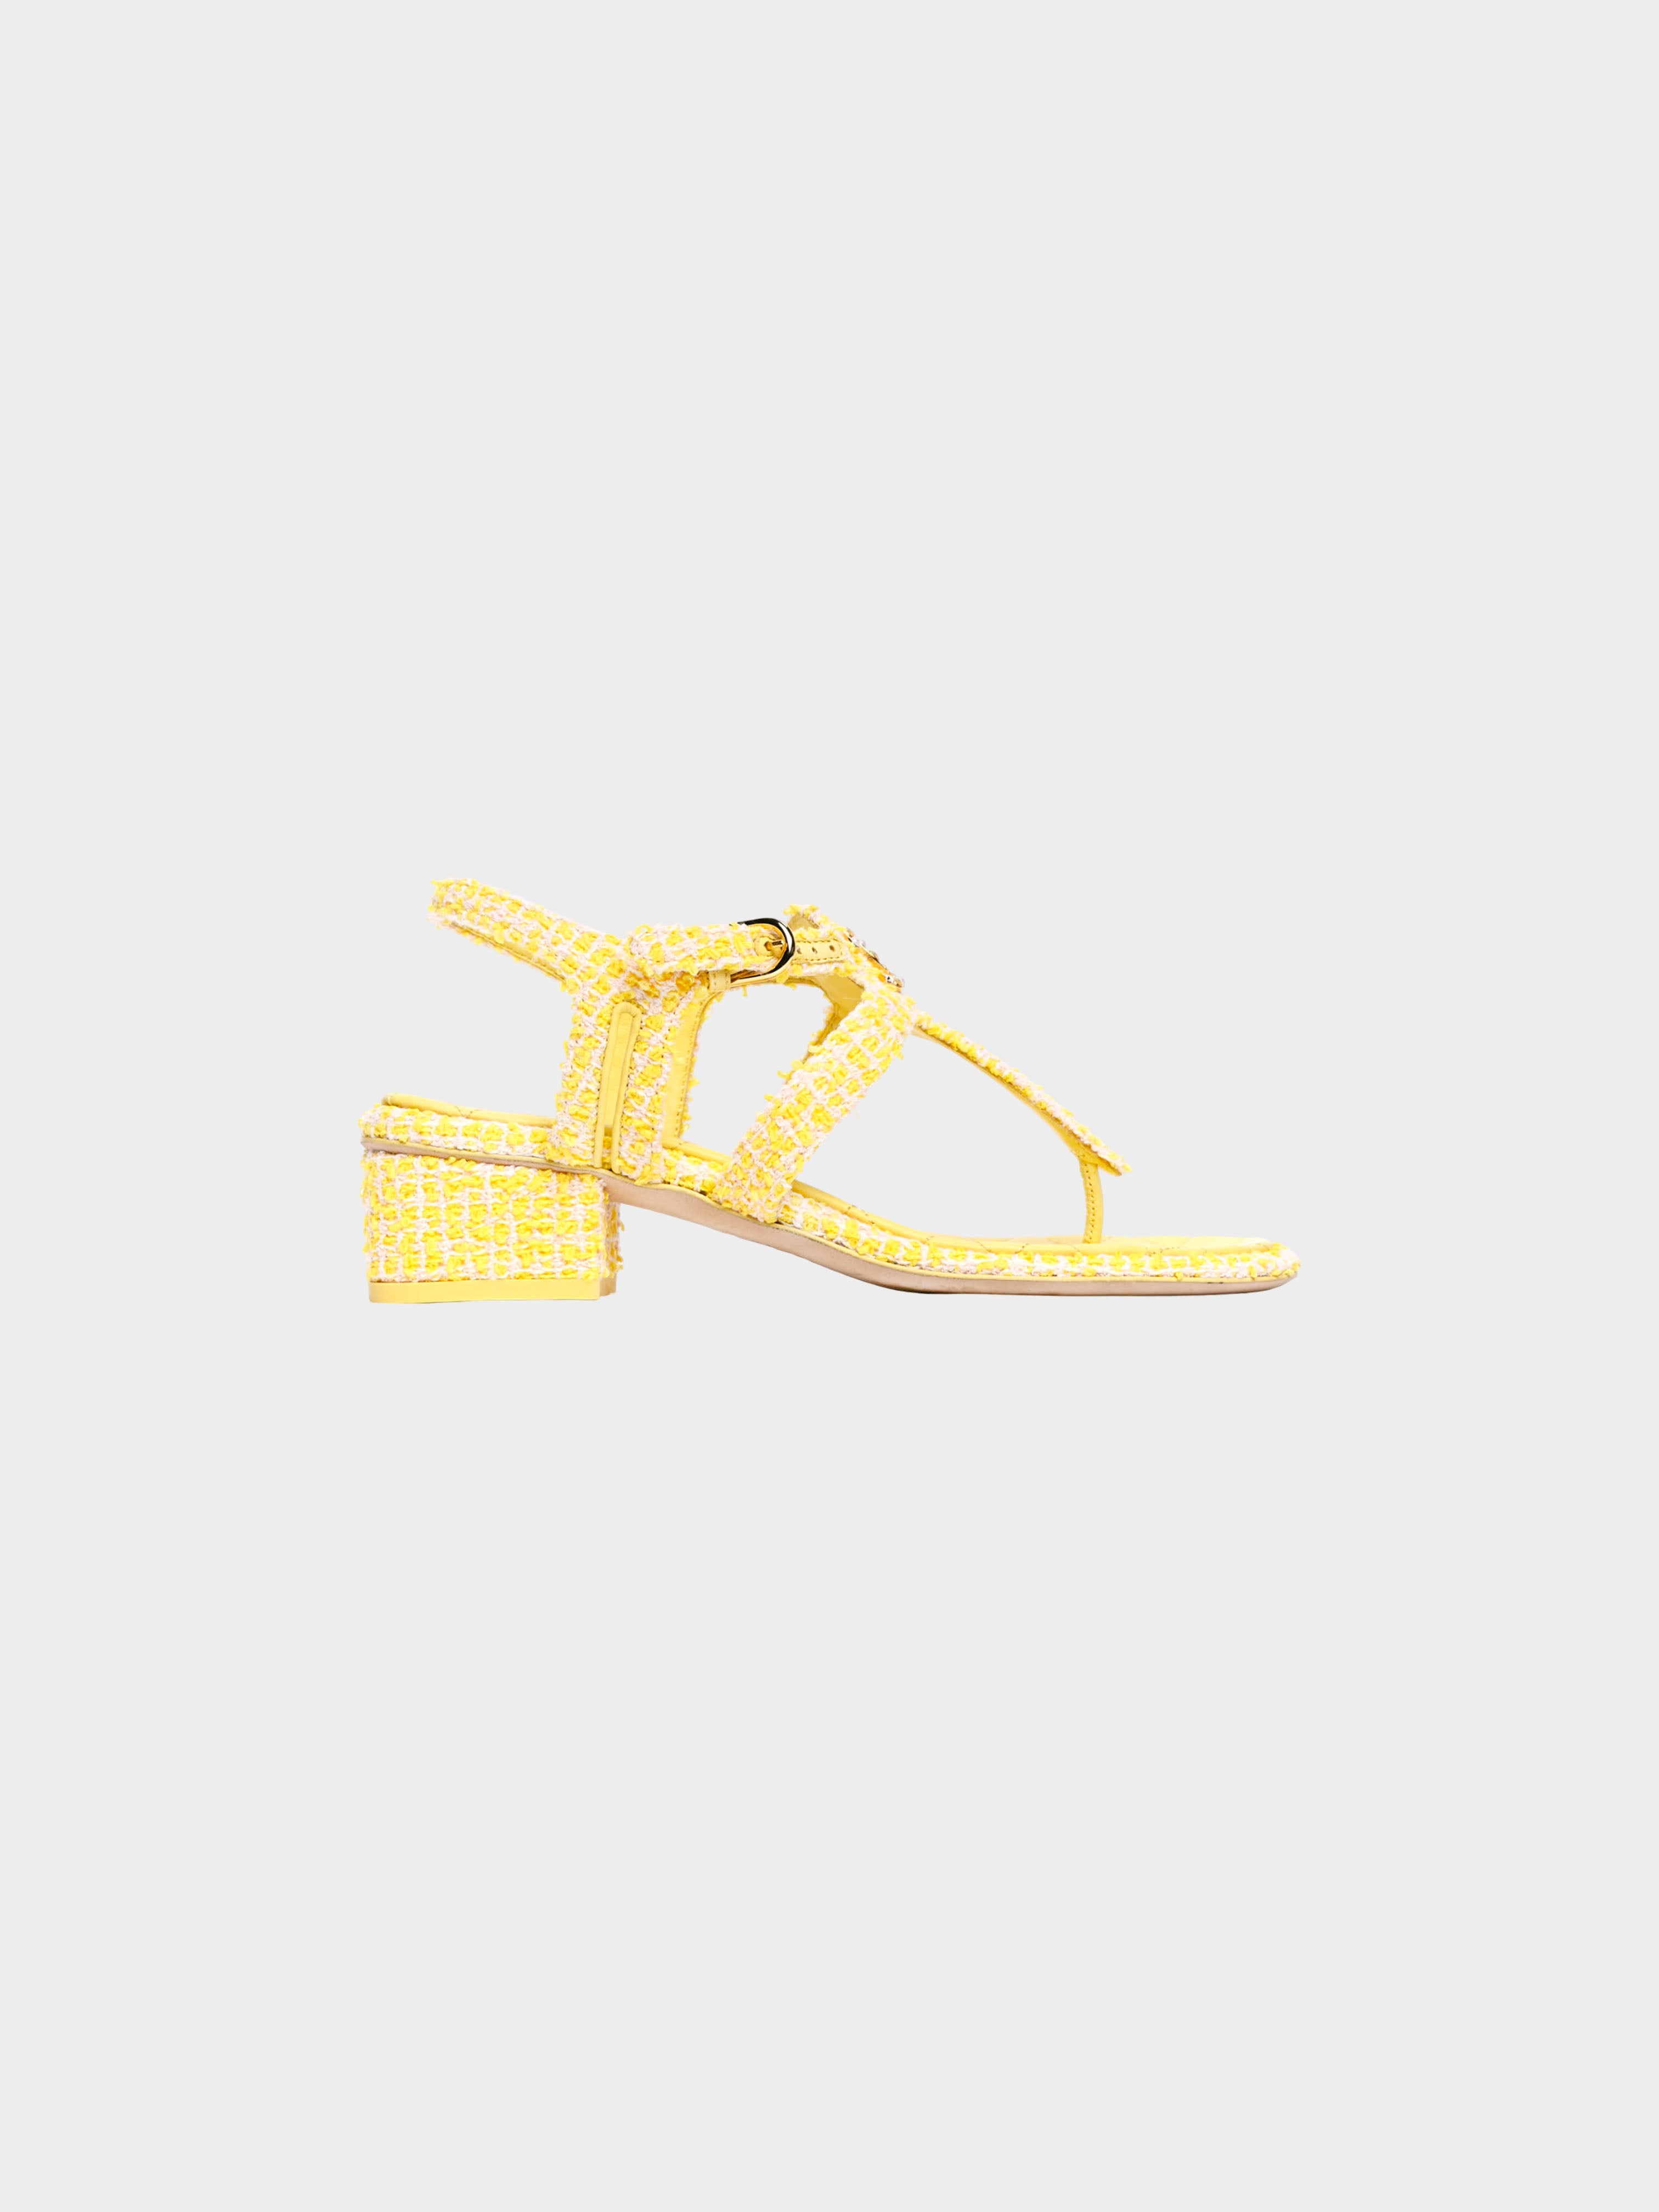 Chanel SS 2021 Yellow Tweed Sandals